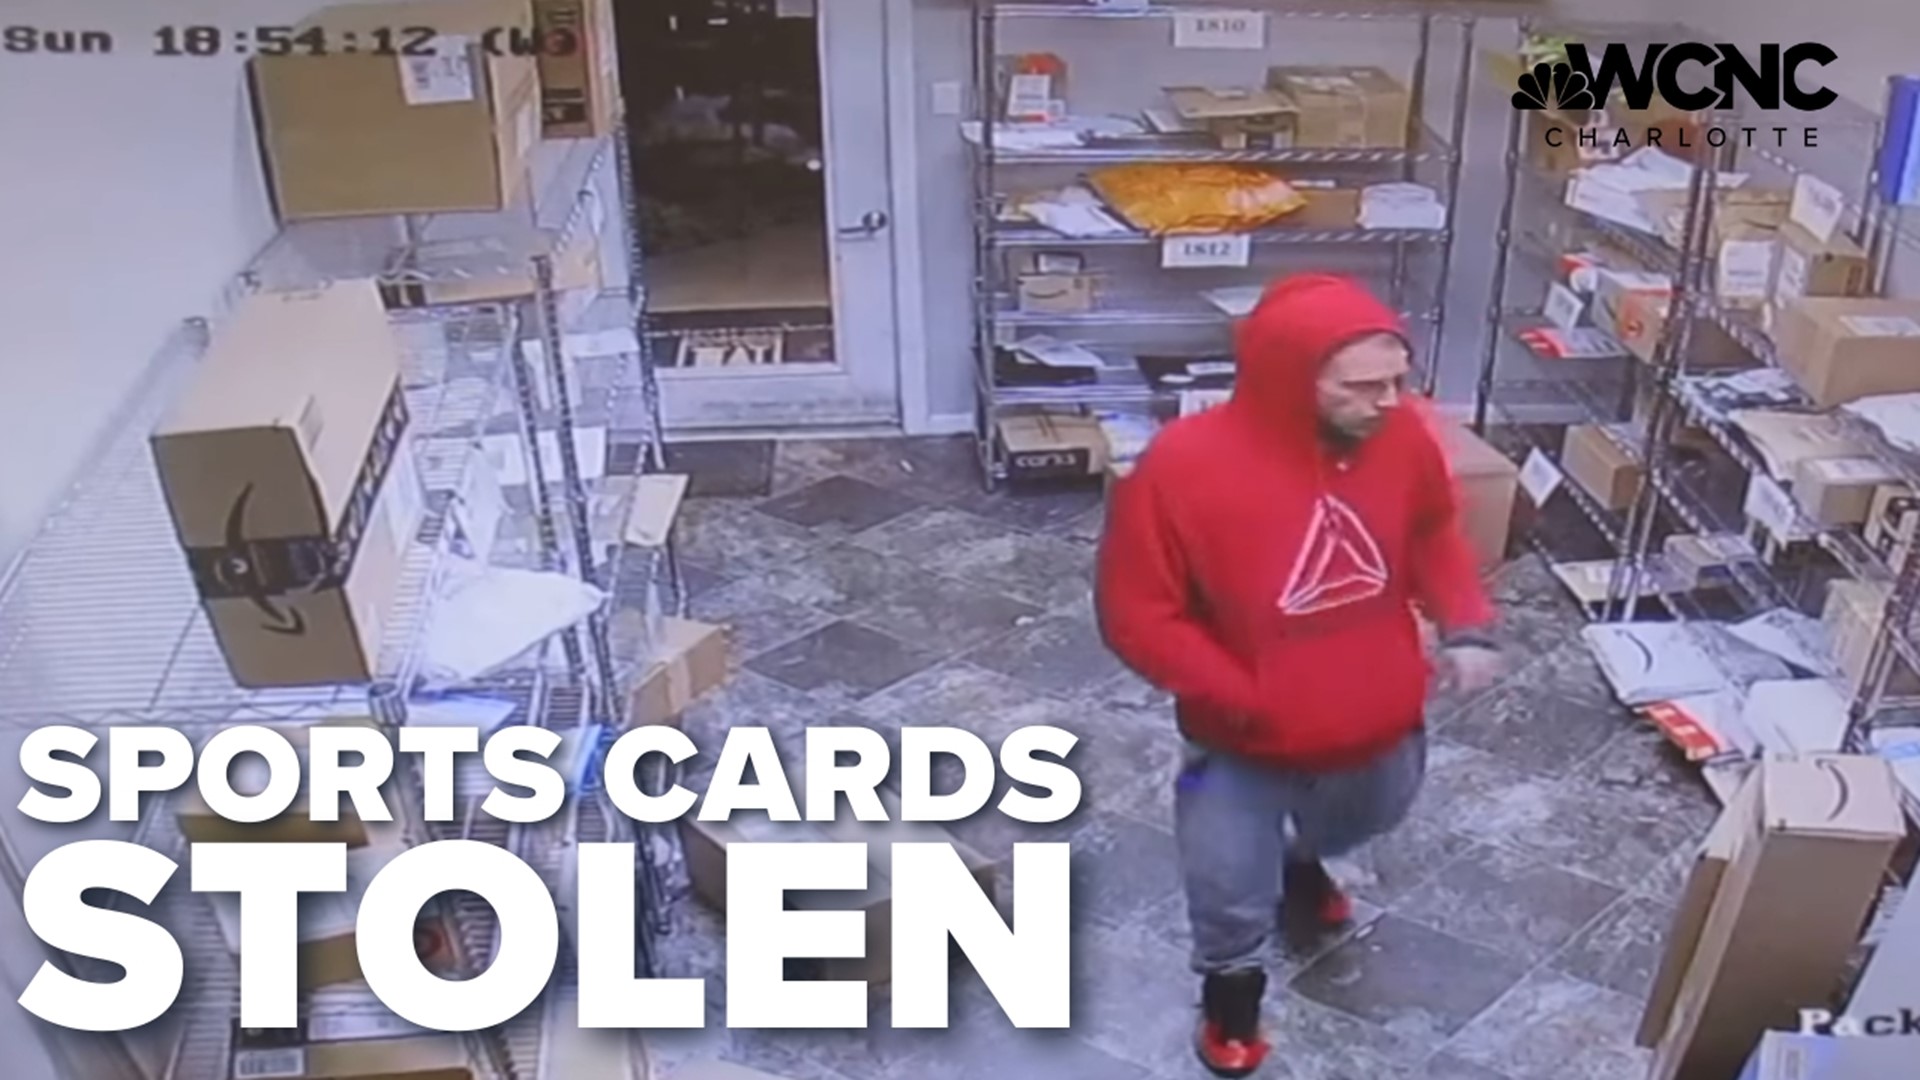 The Rock Hill Police Department is looking to identify people accused of stealing a bunch of collectible sports cards from Grand Slam Cards during a burglary.